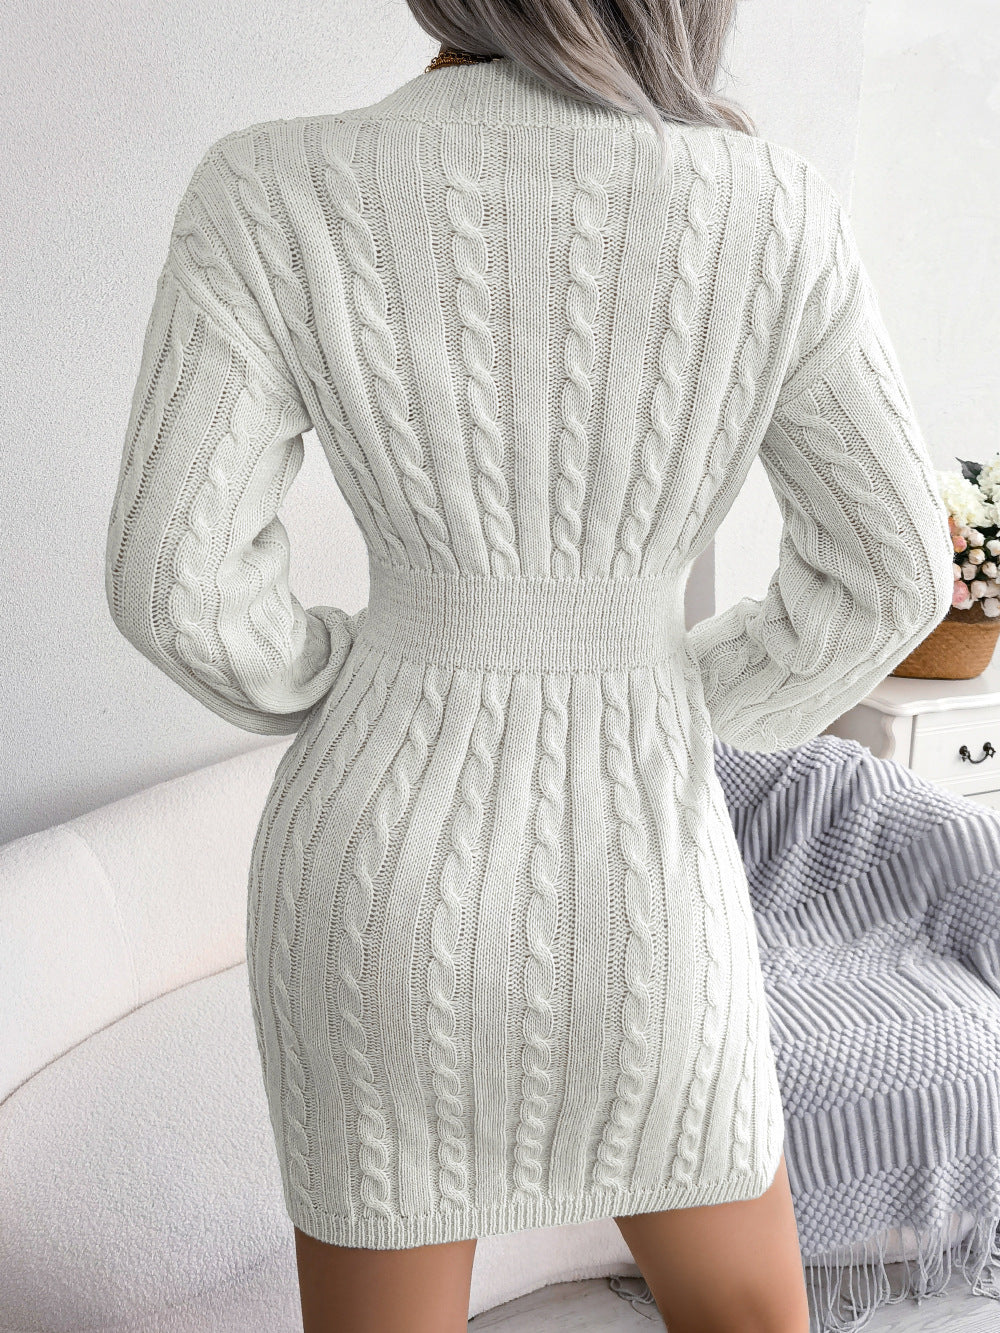 Ivory Meadow V-Neck Mini Sweater Dress | Hypoallergenic - Allergy Friendly - Naturally Free